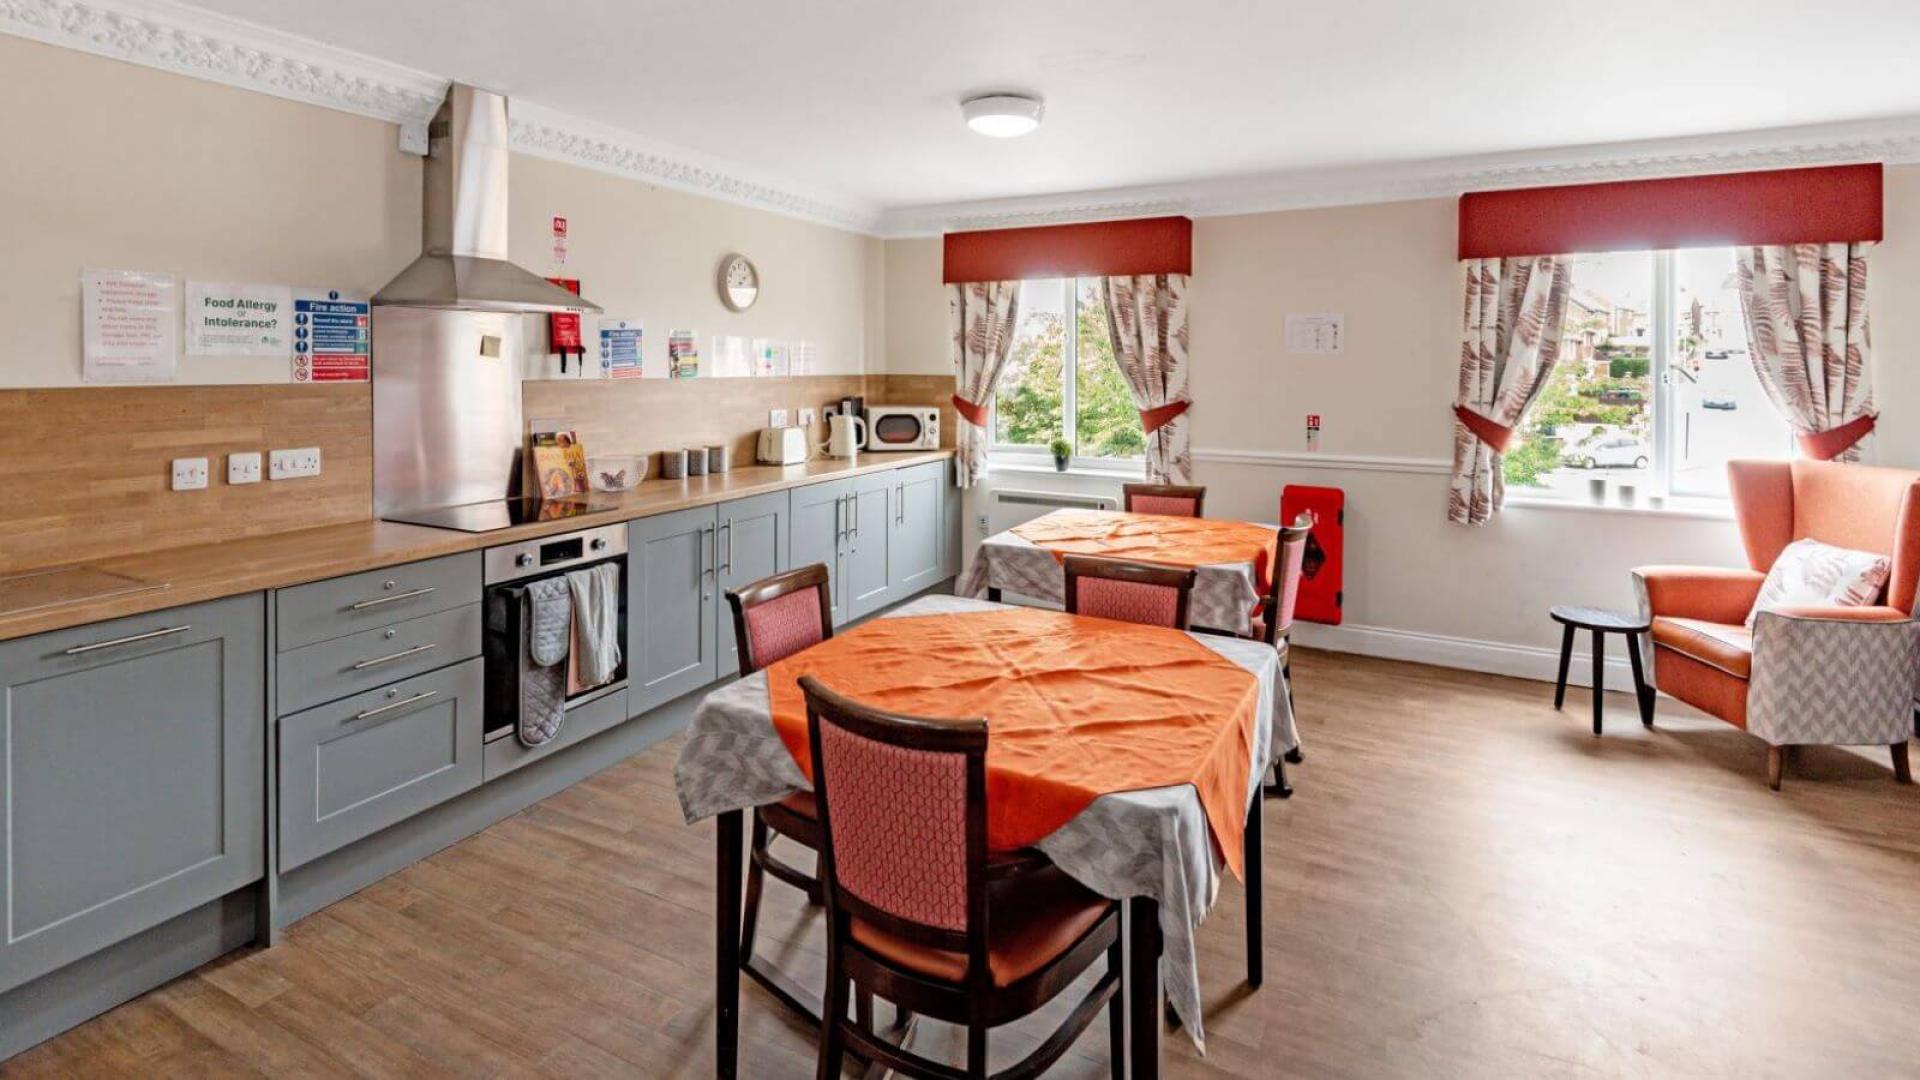 Kitchen and dining room at Archers Court Nursing Care Home in Sunderland 